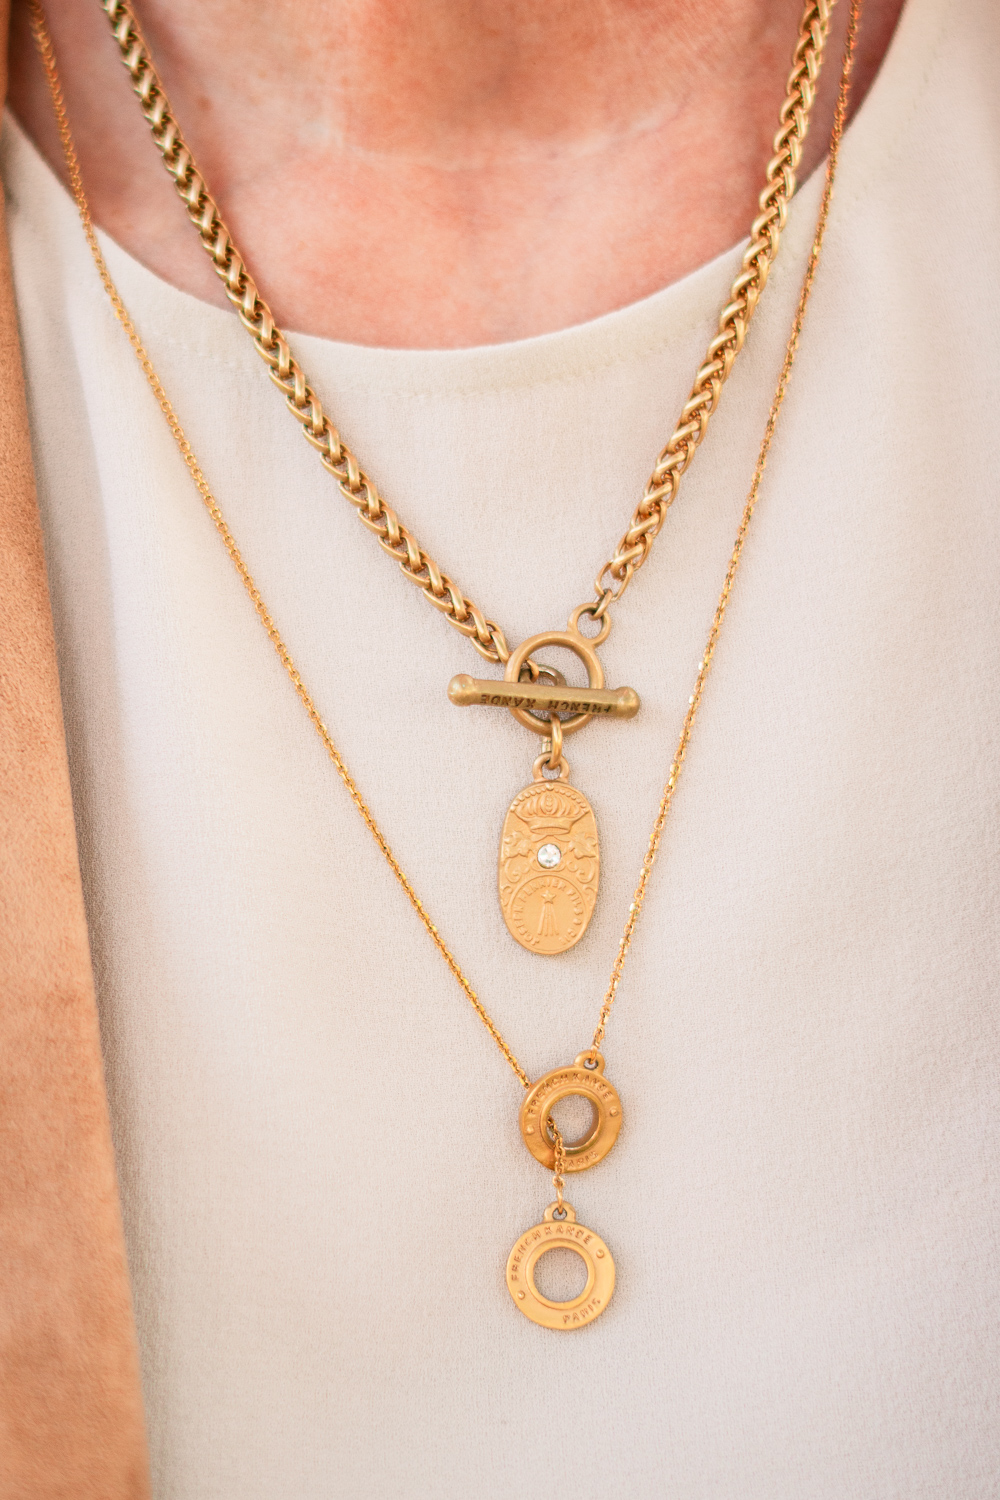 Susan B. of une femme d'un certain age wears layered gold necklaces from the French Kande FK Petite collection.